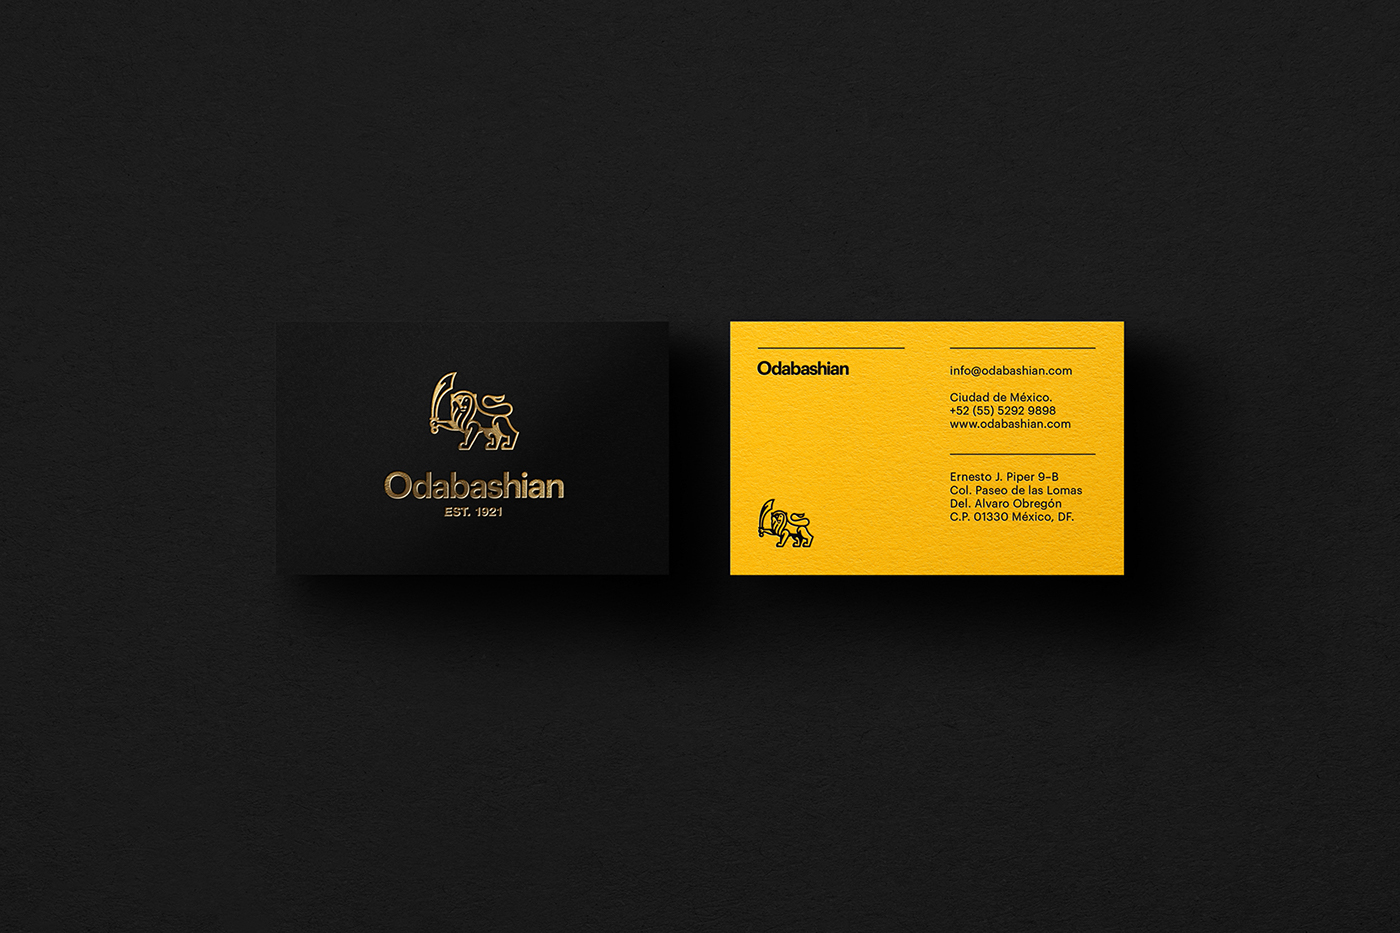 Business Cards Anagrama Stationery first impression branding  Corporate Identity Collateral Contact exchange print Direct Impression